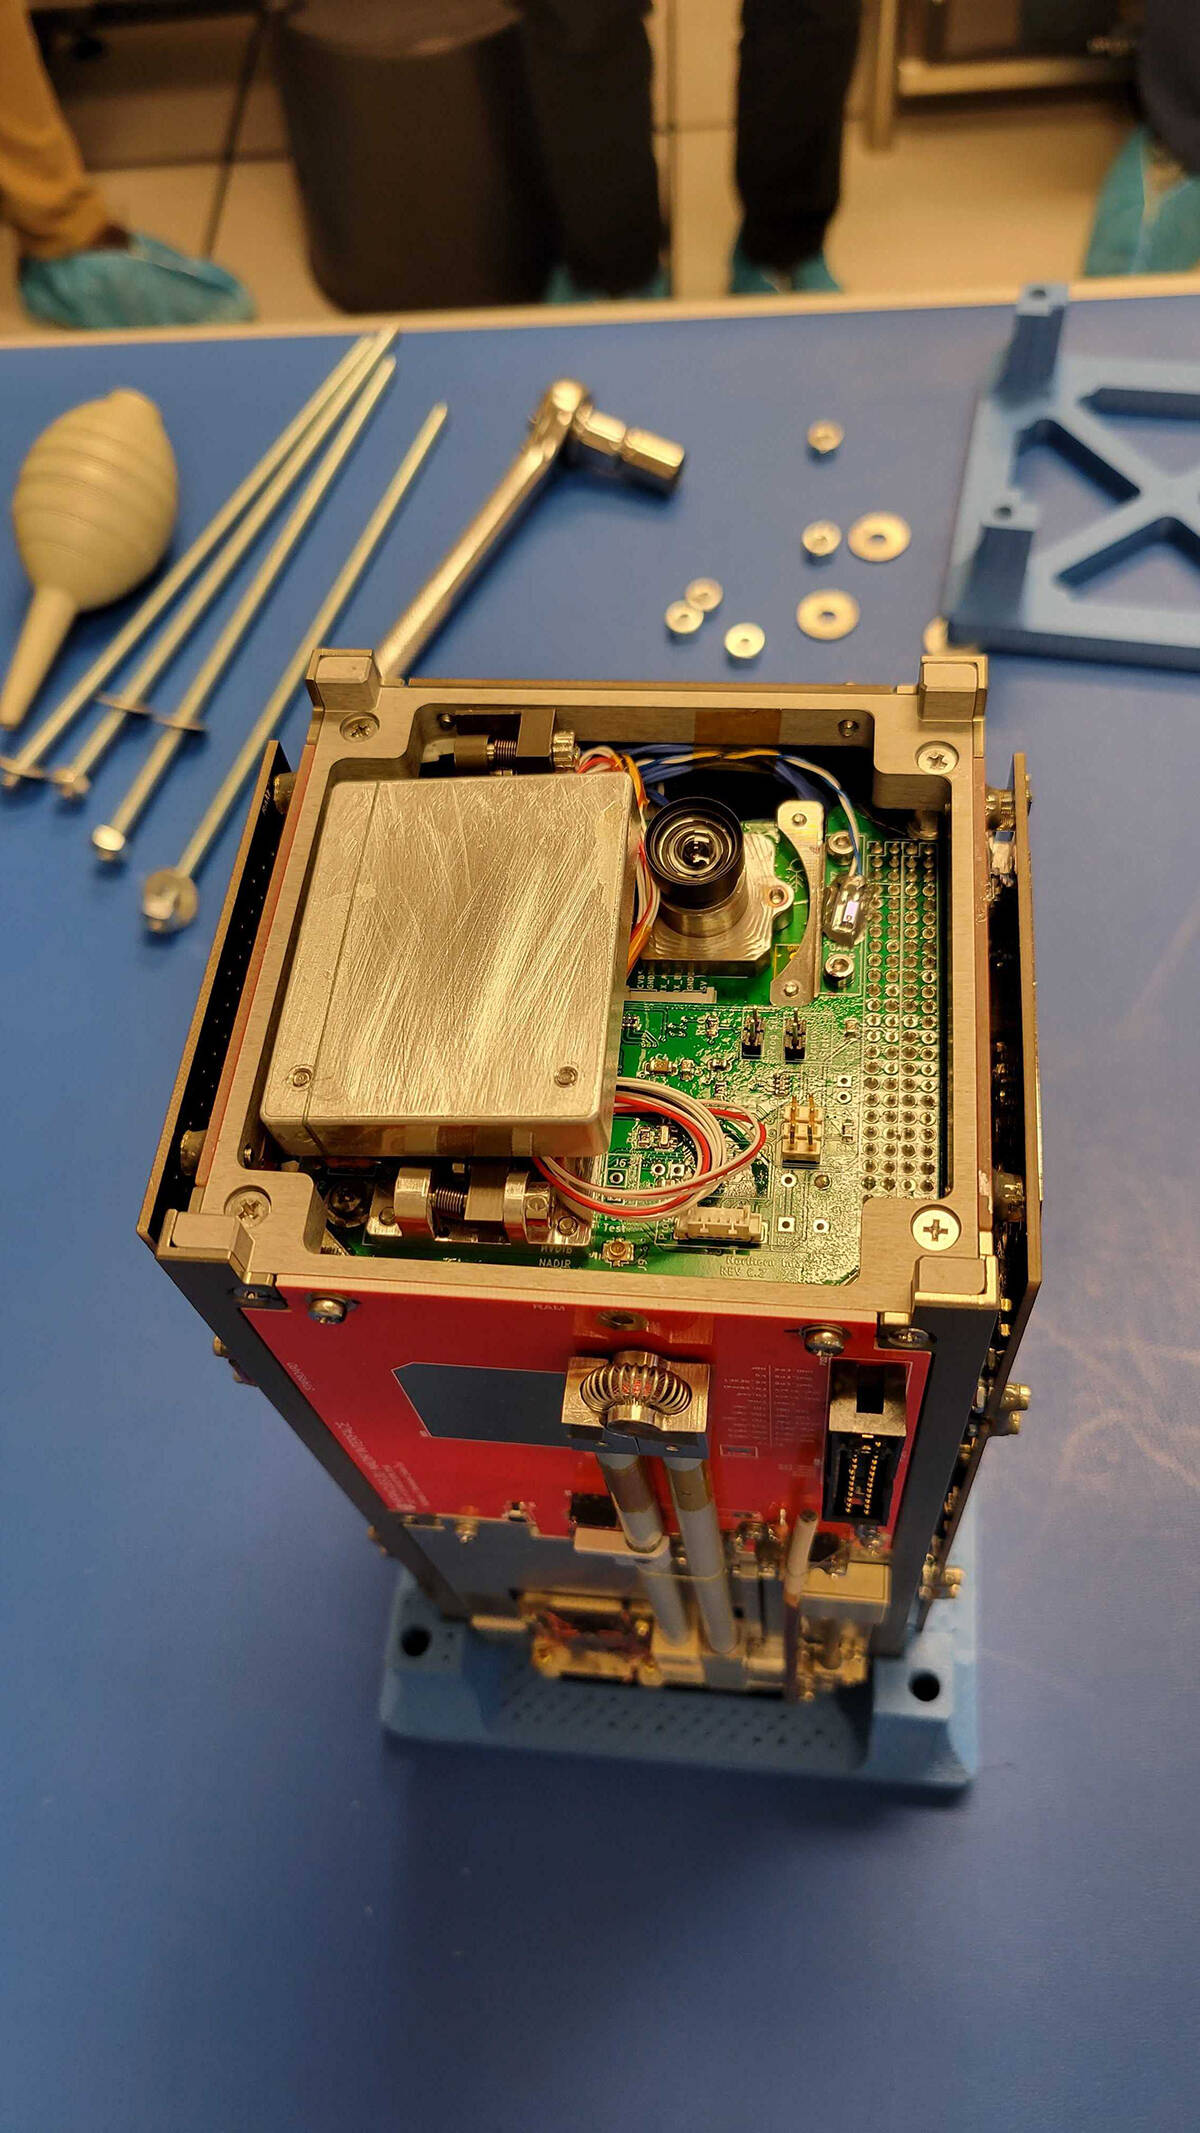                                             The Northern Images Mission payload mounted to the front end of AuroraSat. The display screen will flip out and the camera will take photos of the scene from orbit. Photo courtesy of Patrick Gall          